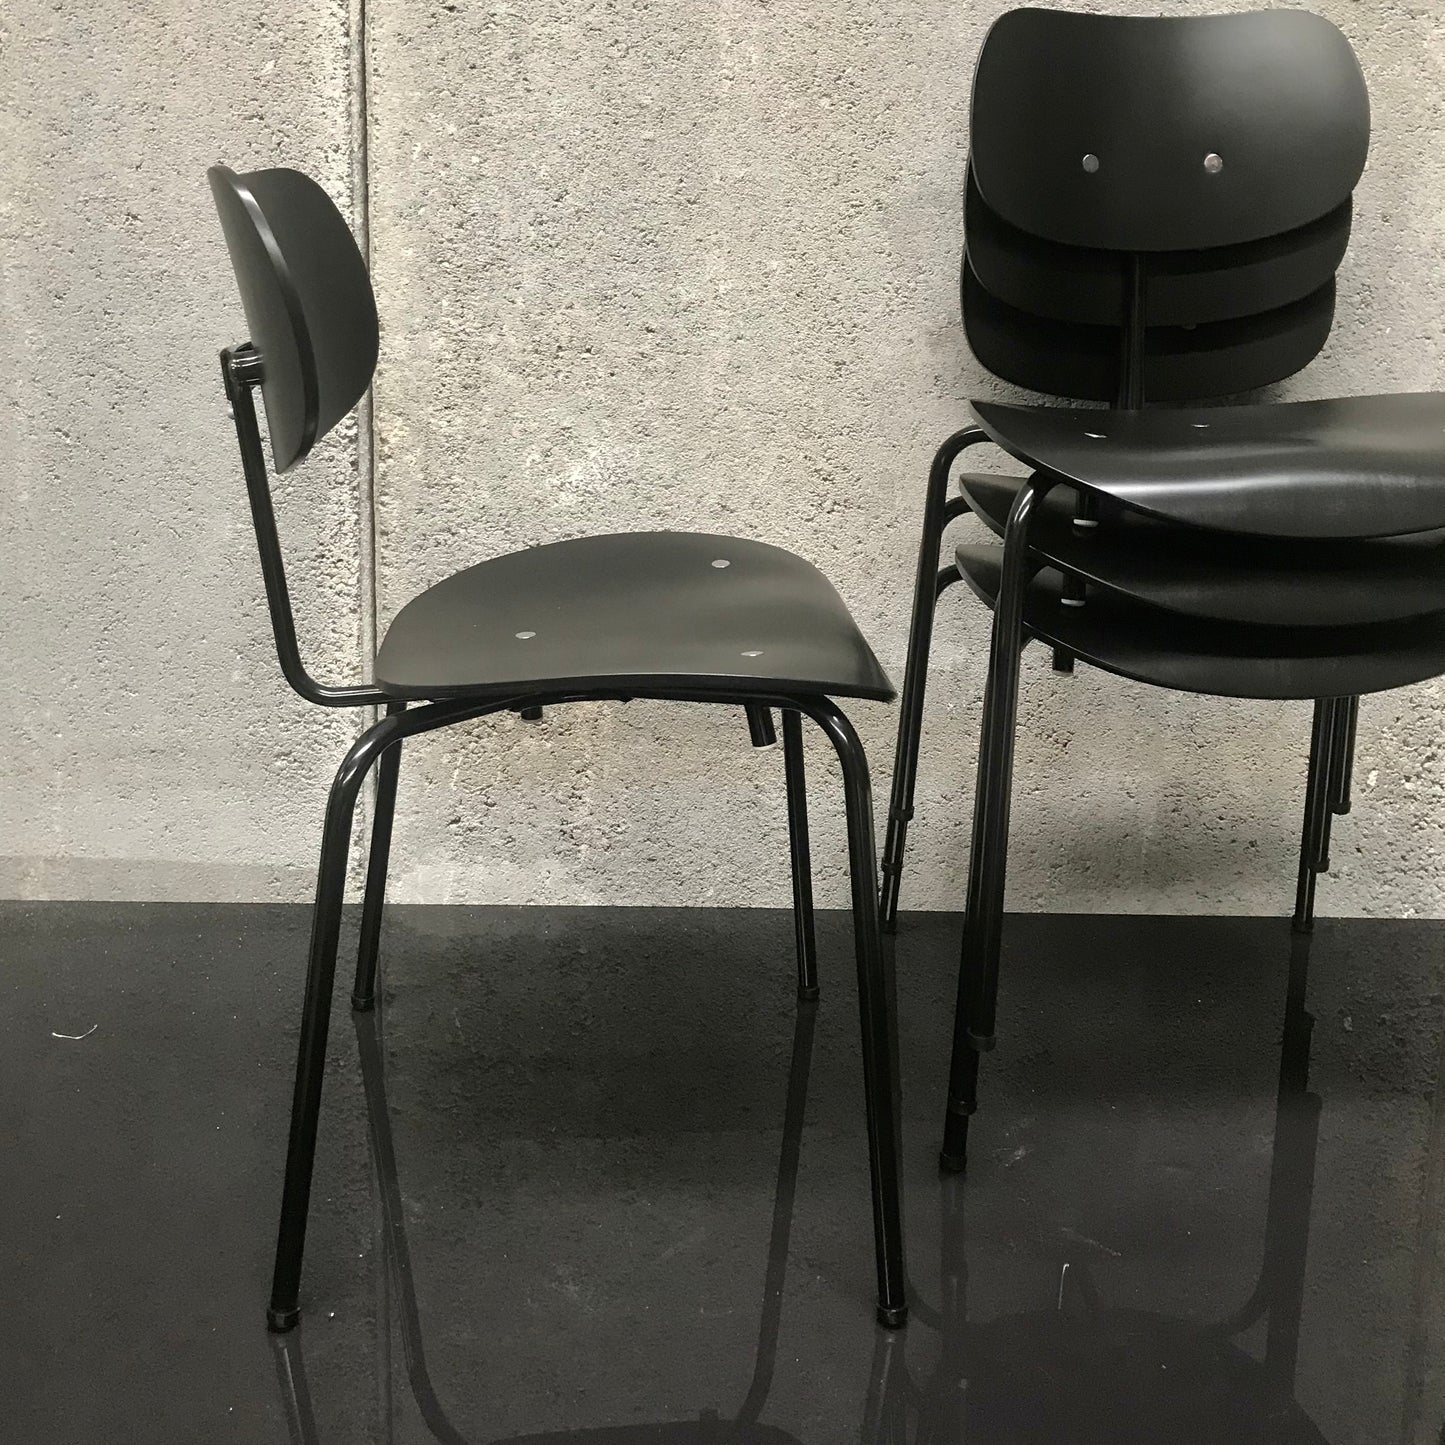 Set of FOUR SE 68 Multi-Purpose Chair by Wilde + Spieth with Black Base & Seat